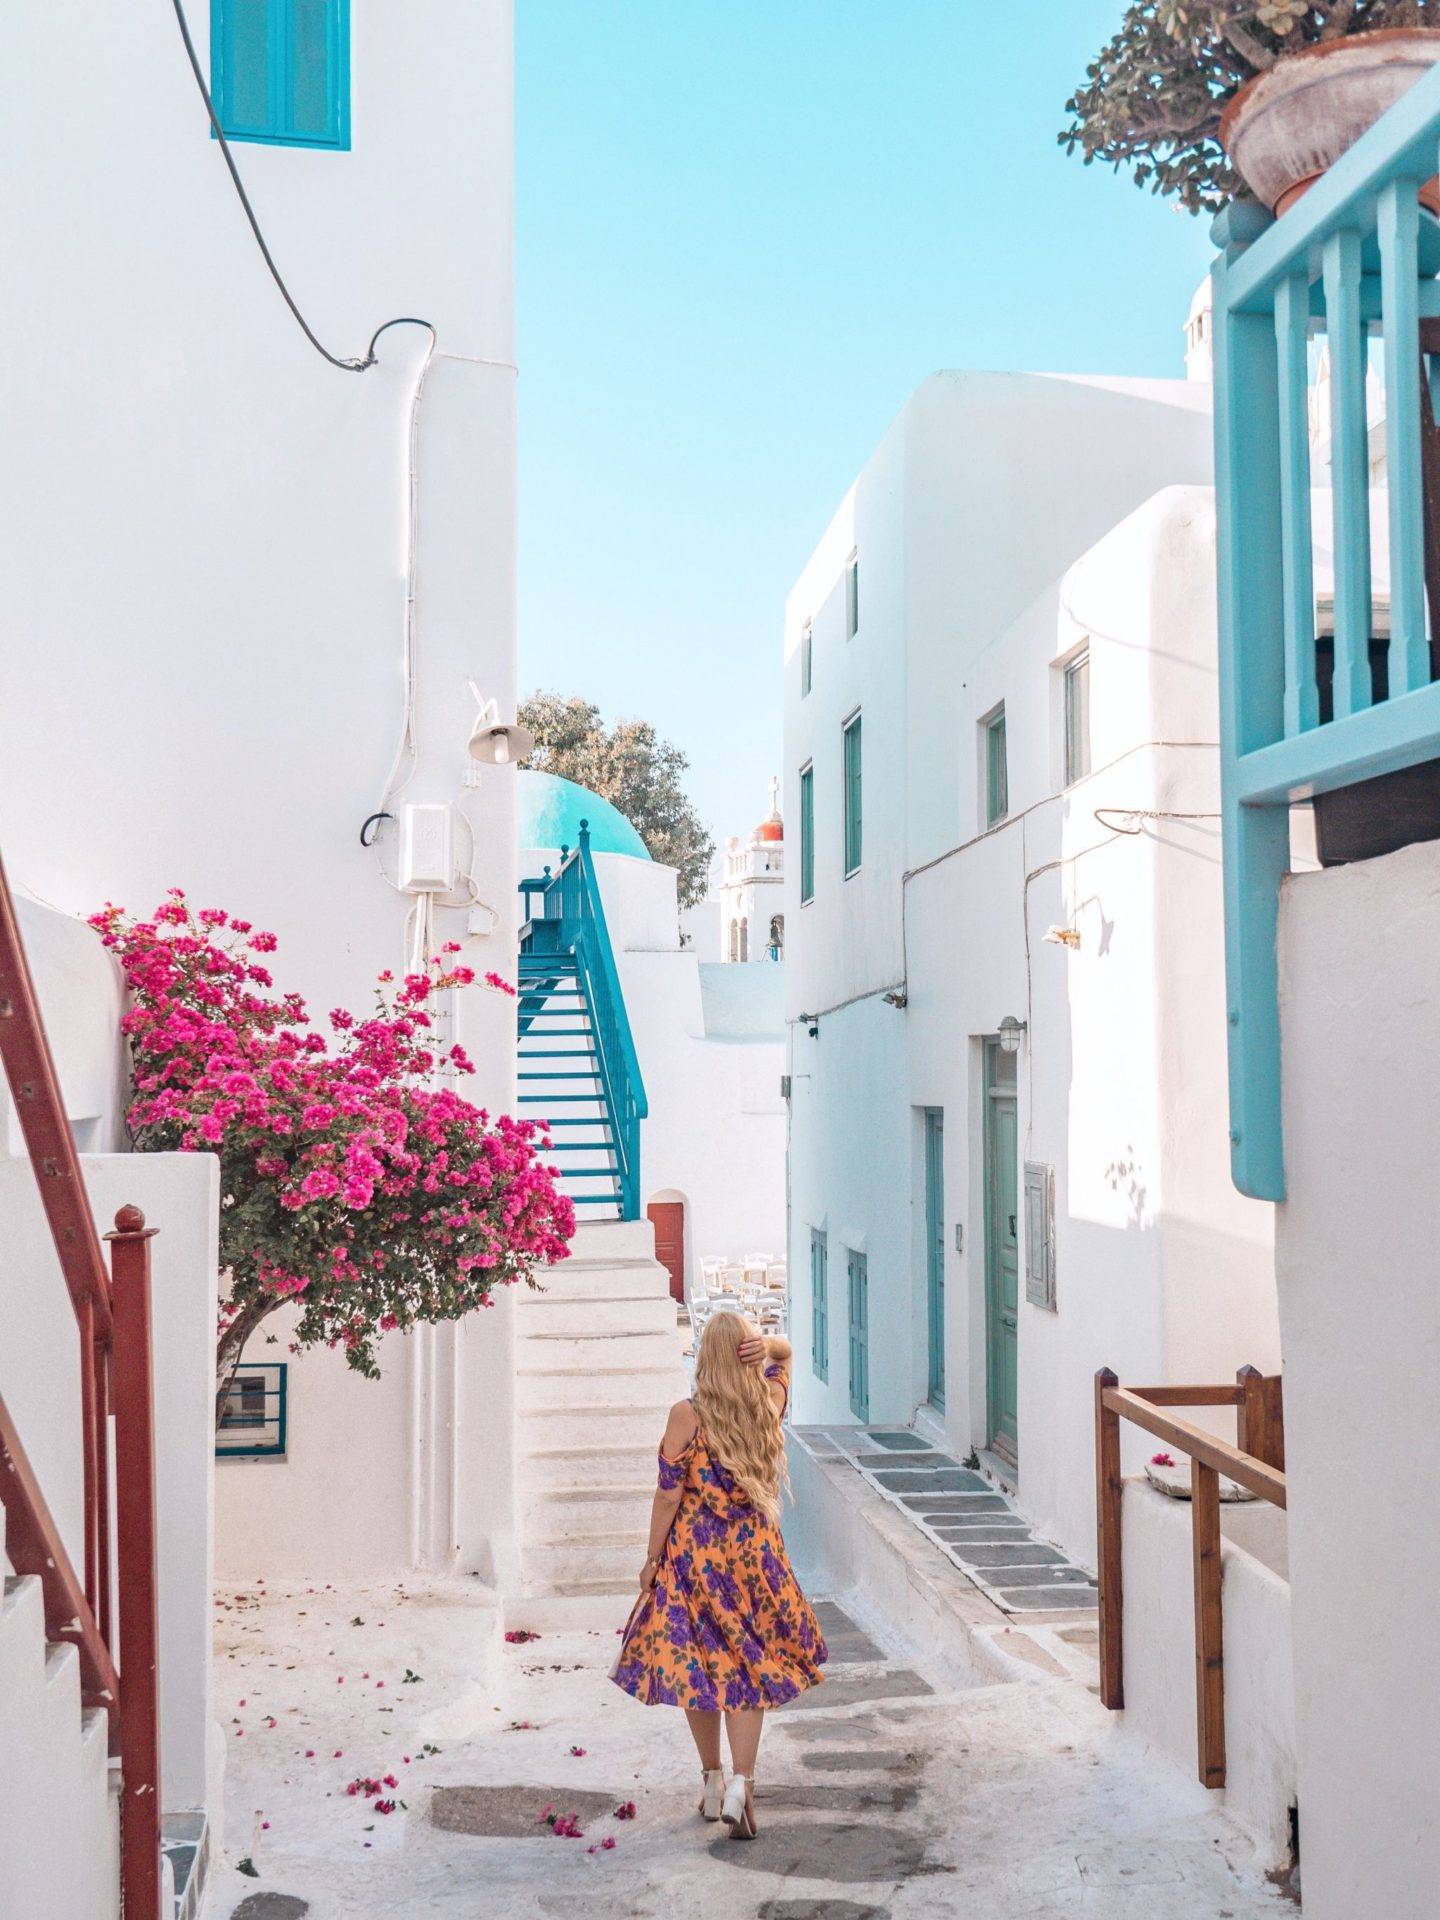 Most Instagrammable Places in Mykonos: The streets of Old Town Mykonos